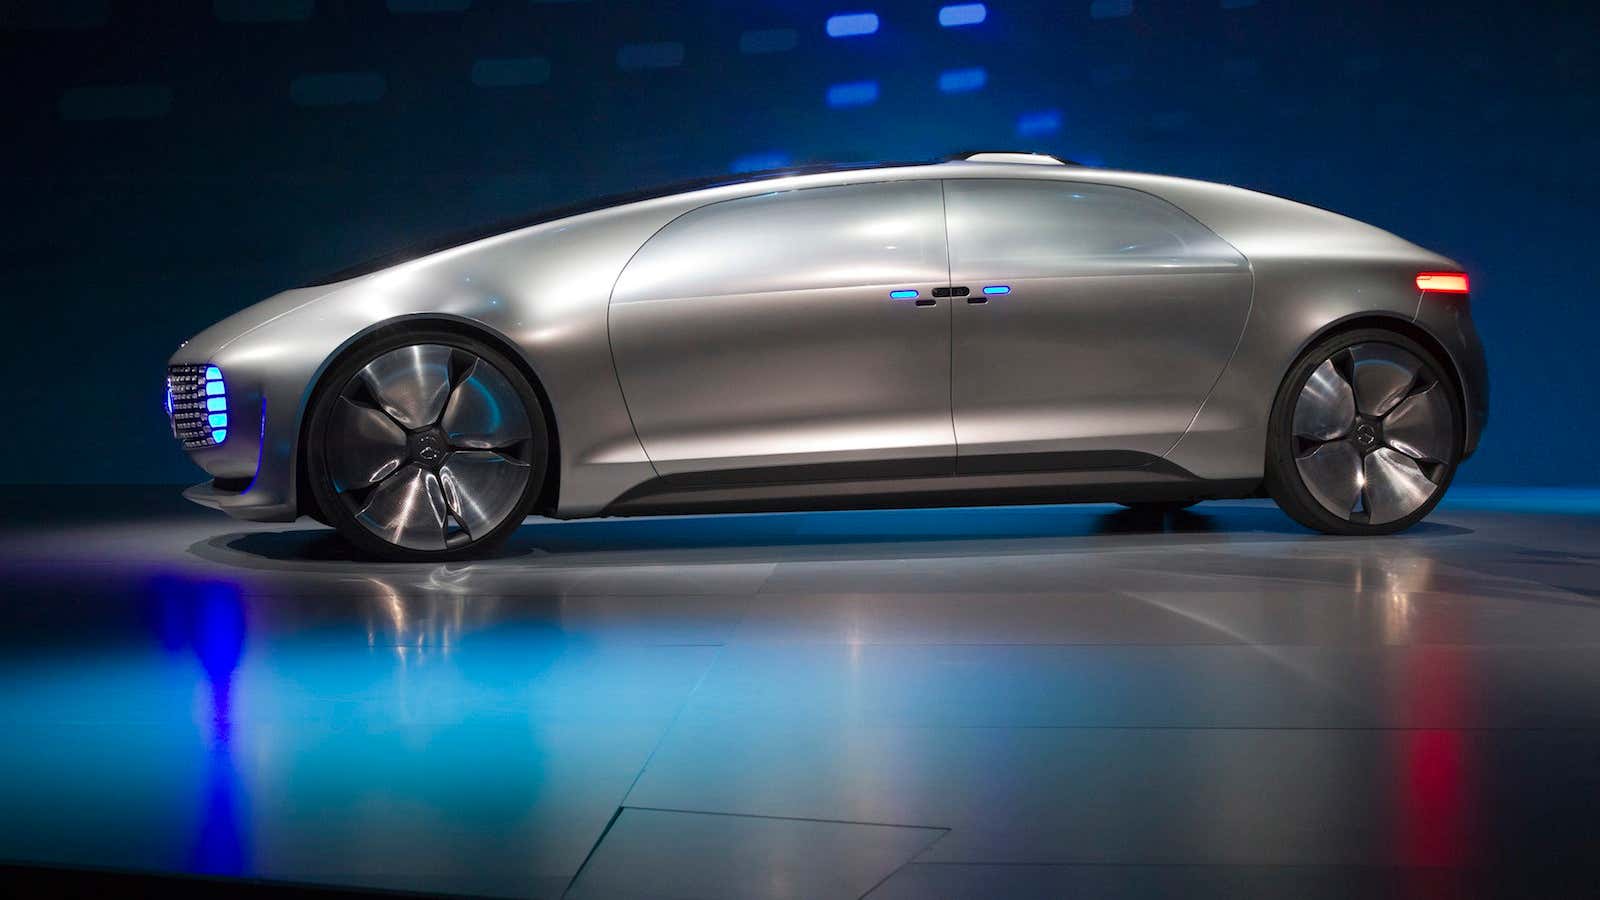 The Mercedes-Benz F015 Luxury in Motion autonomous concept car is pictured on-stage during the 2015 International Consumer Electronics Show (CES) in Las Vegas, Nevada January…